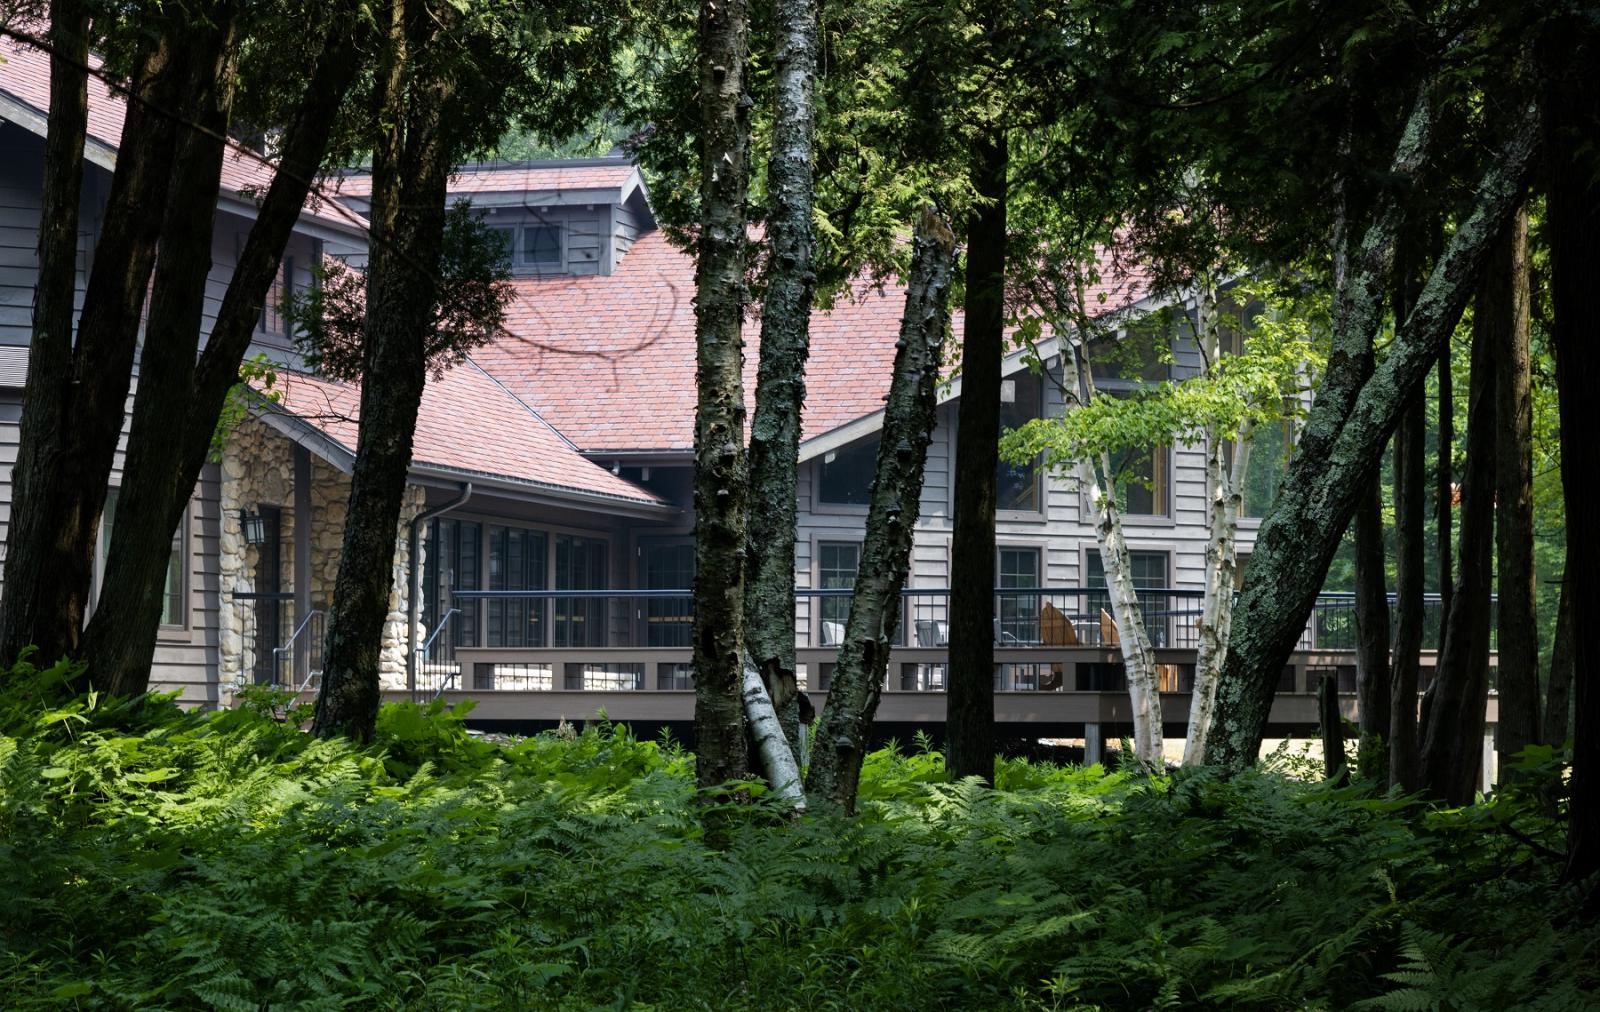 The lodge at Bjorklunden is seen through the trees. 